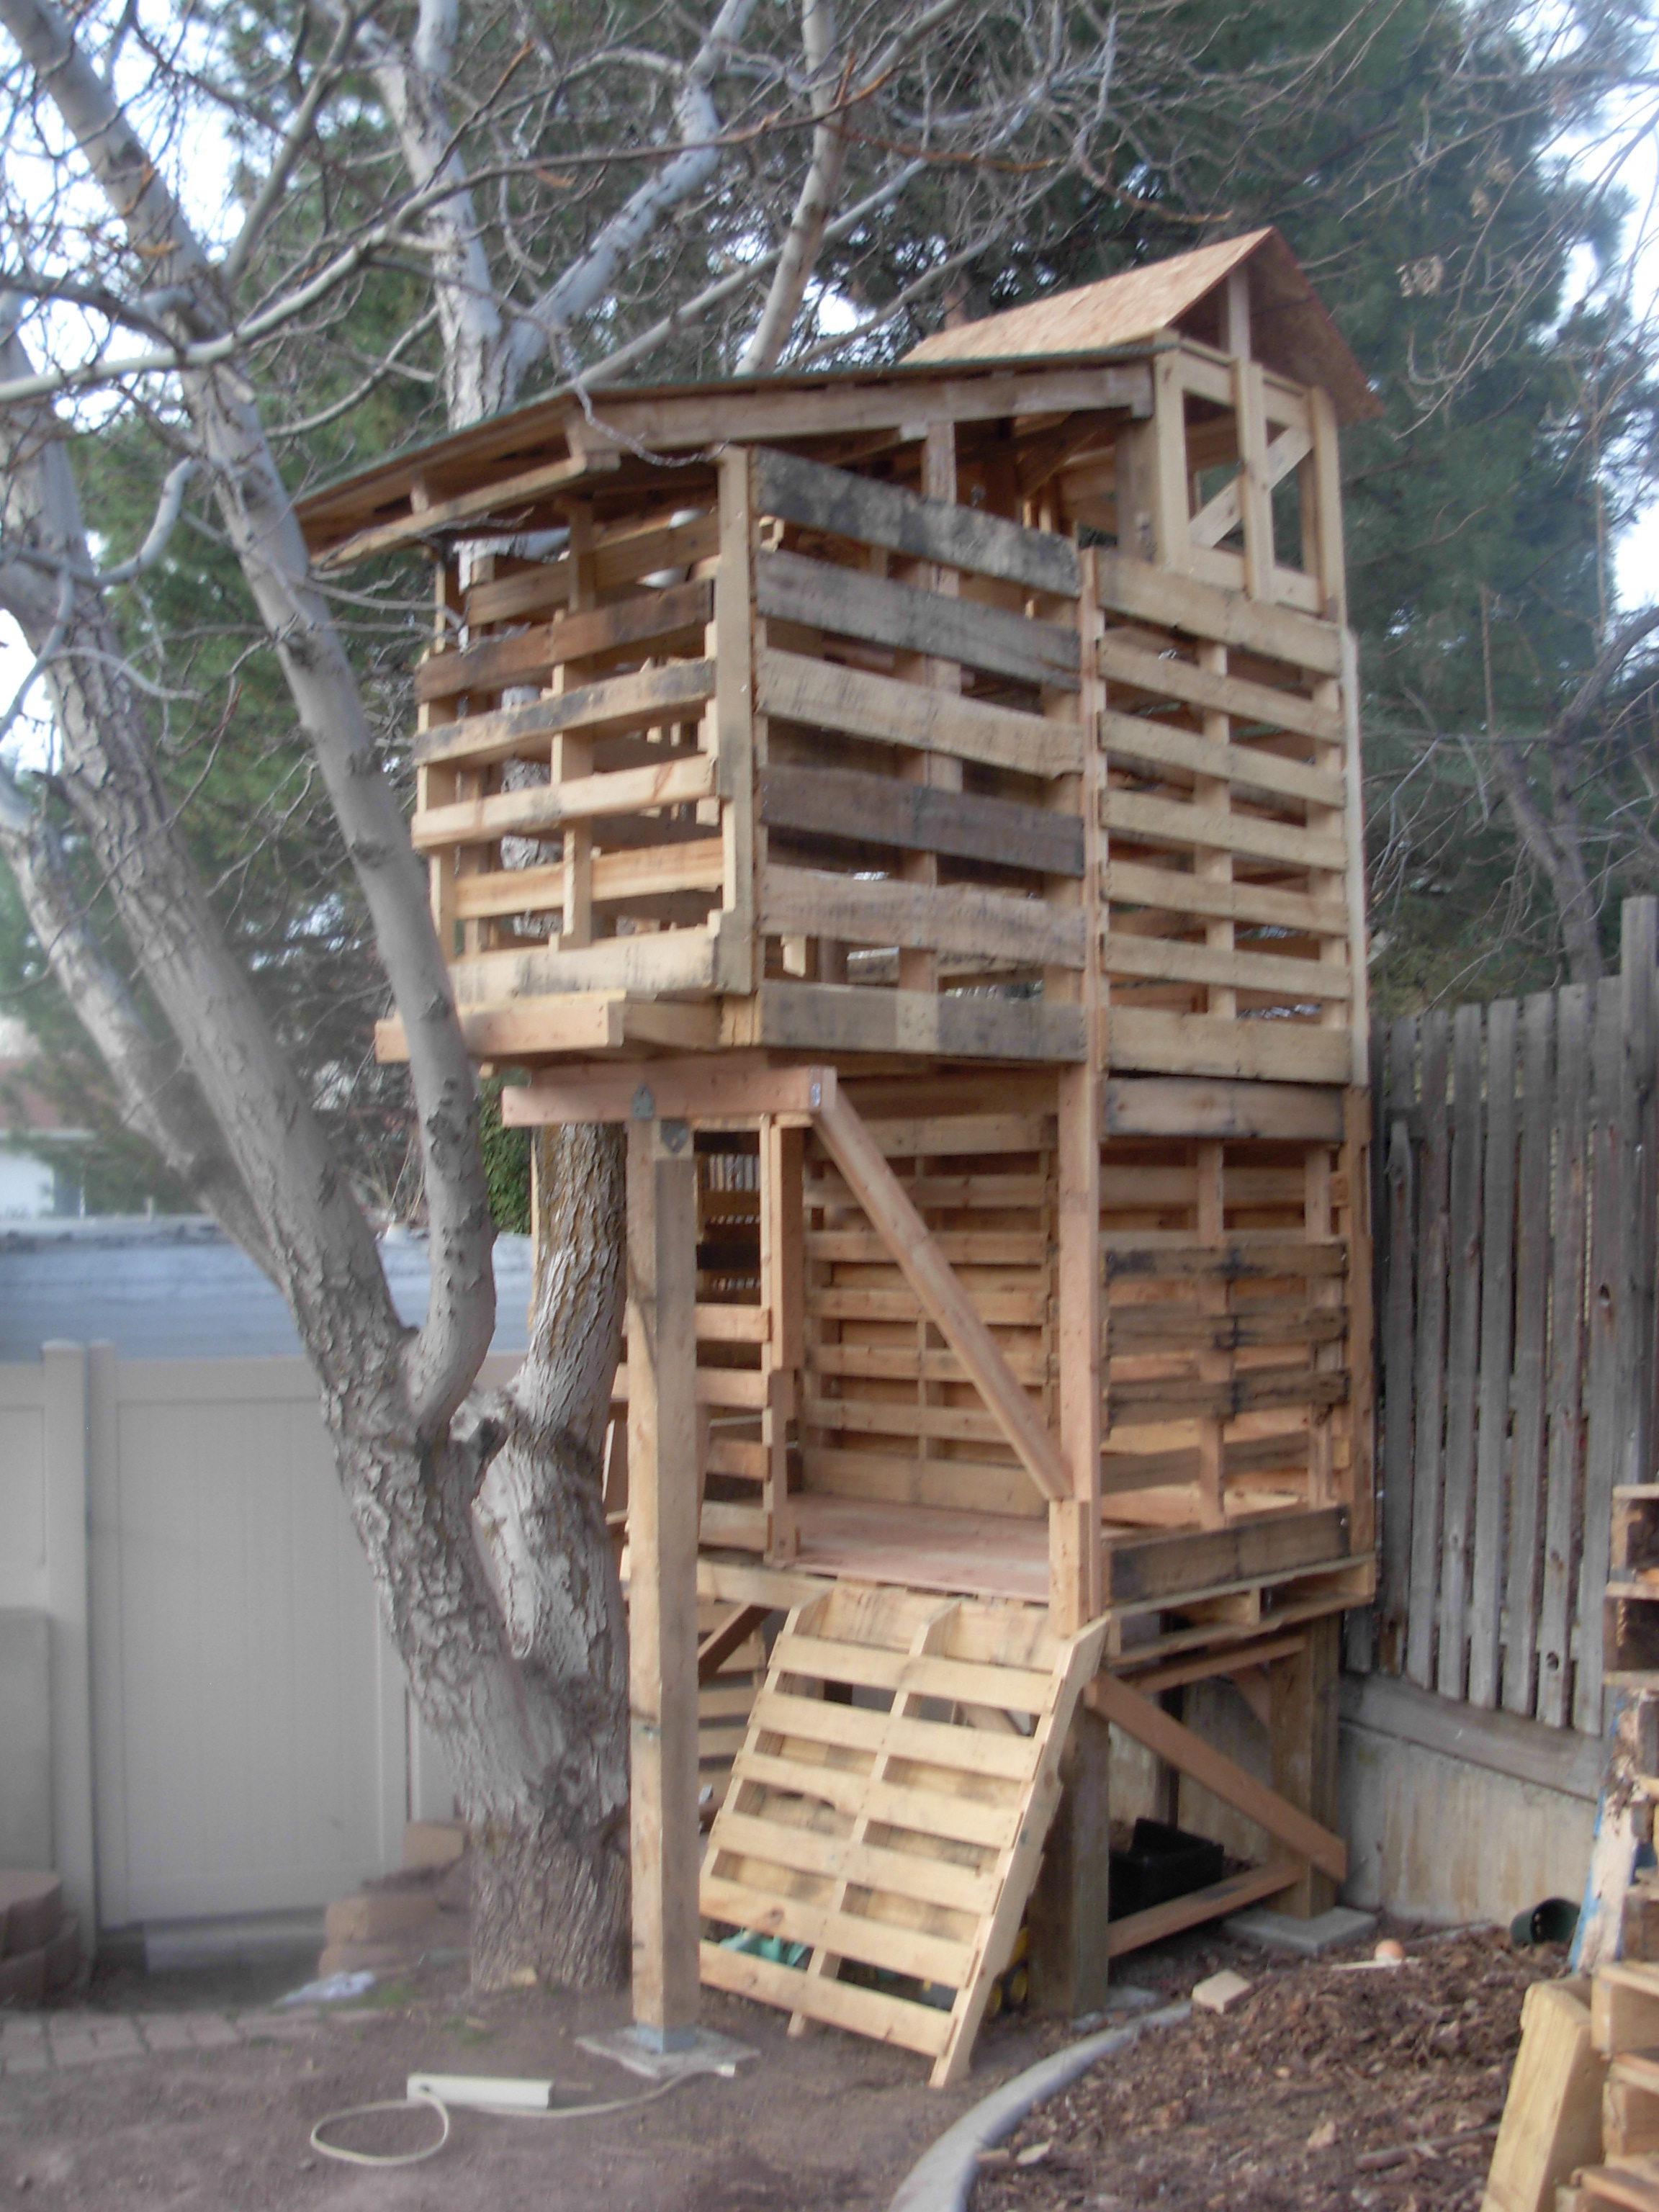 Firewood storage. Could be turned into a cute/small chicken coop!